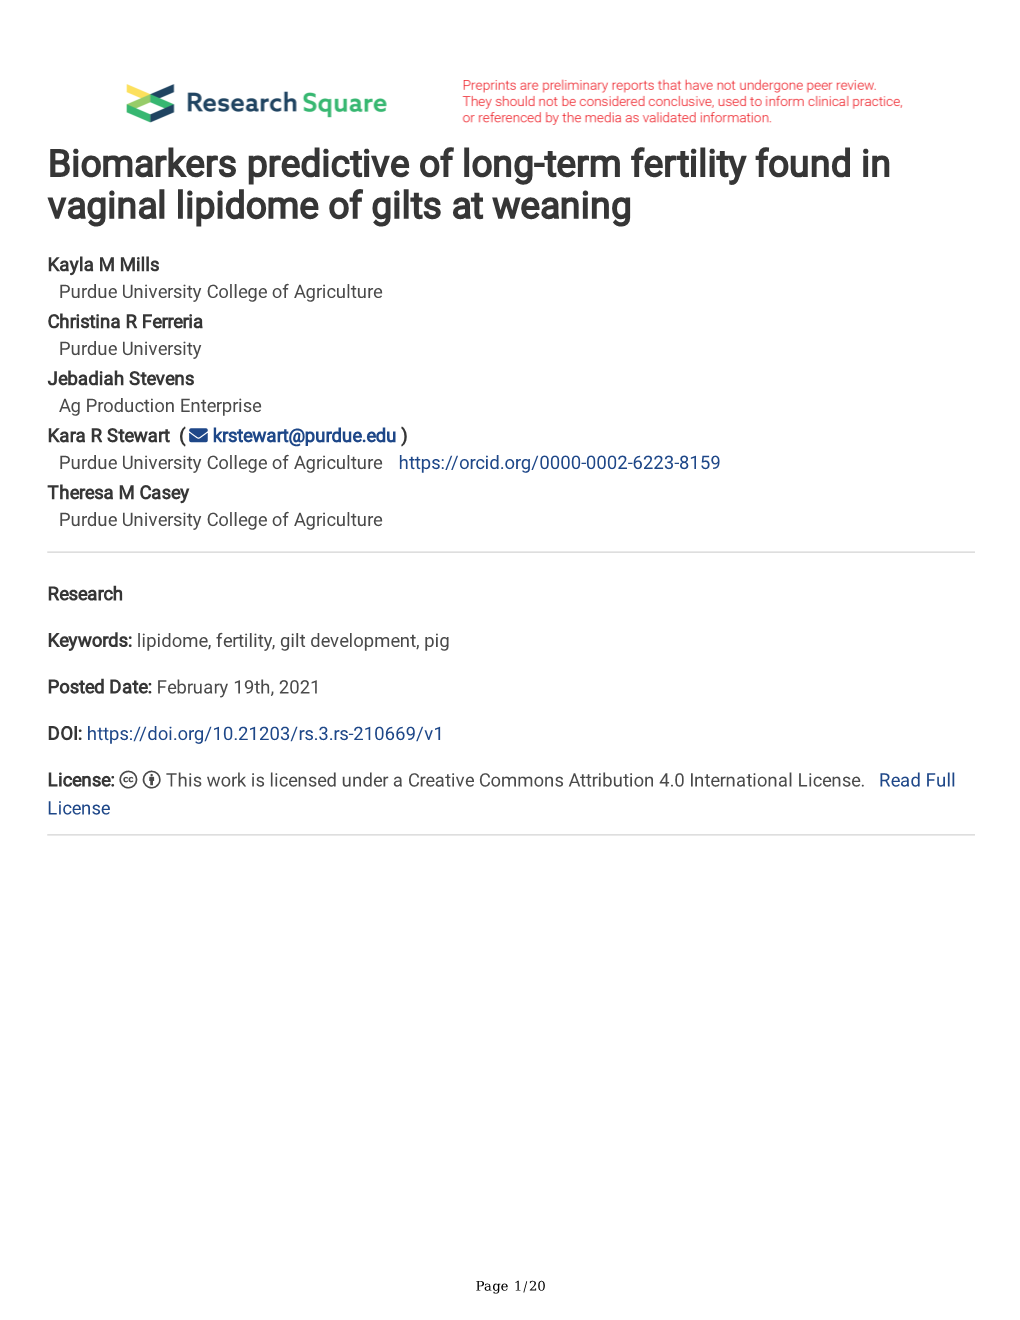 Biomarkers Predictive of Long-Term Fertility Found in Vaginal Lipidome of Gilts at Weaning